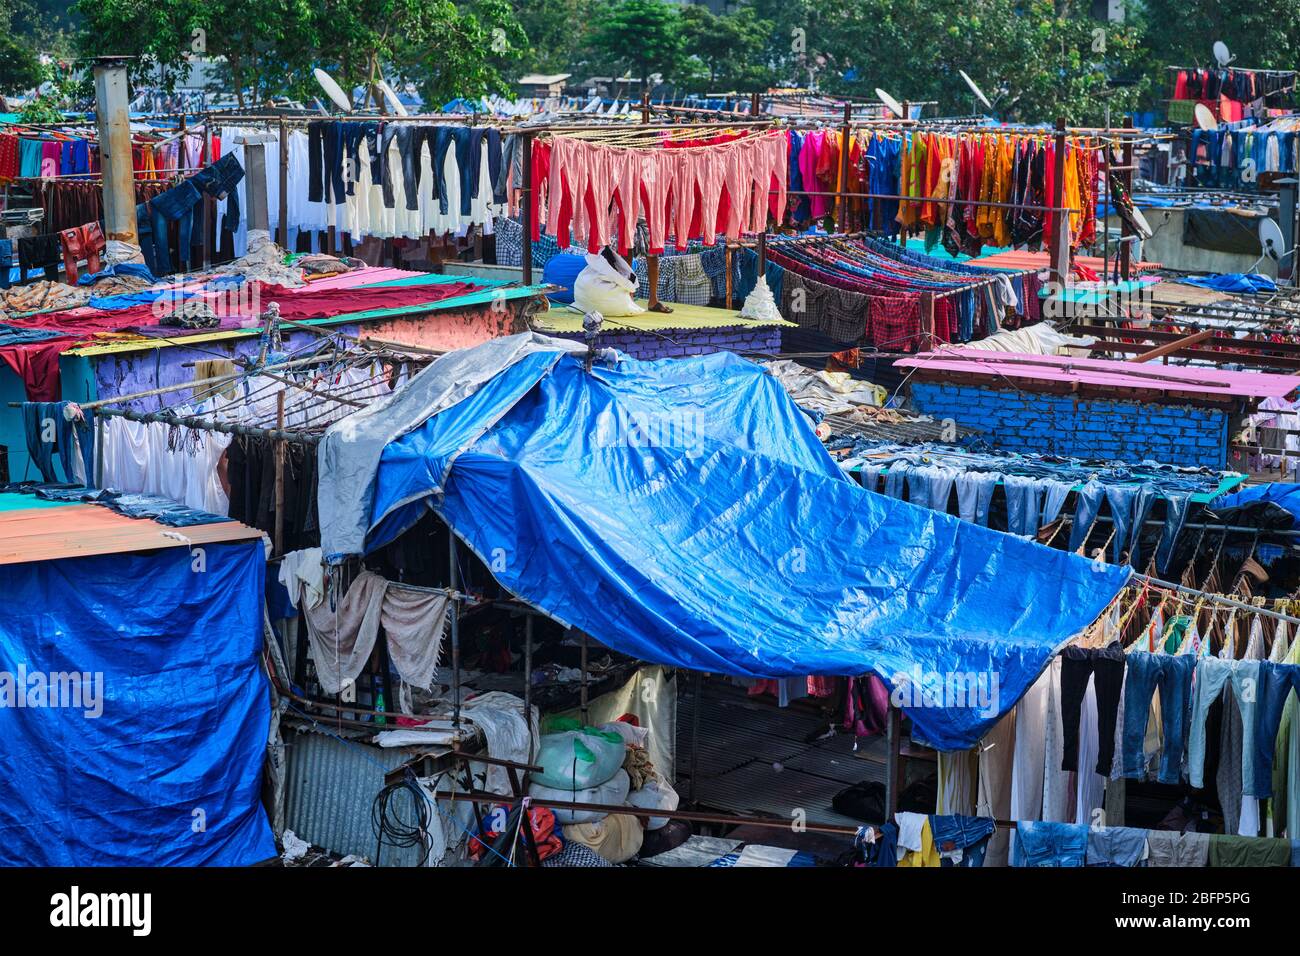 Dhobi Ghat is an open air laundromat lavoir in Mumbai, India with laundry drying on ropes Stock Photo